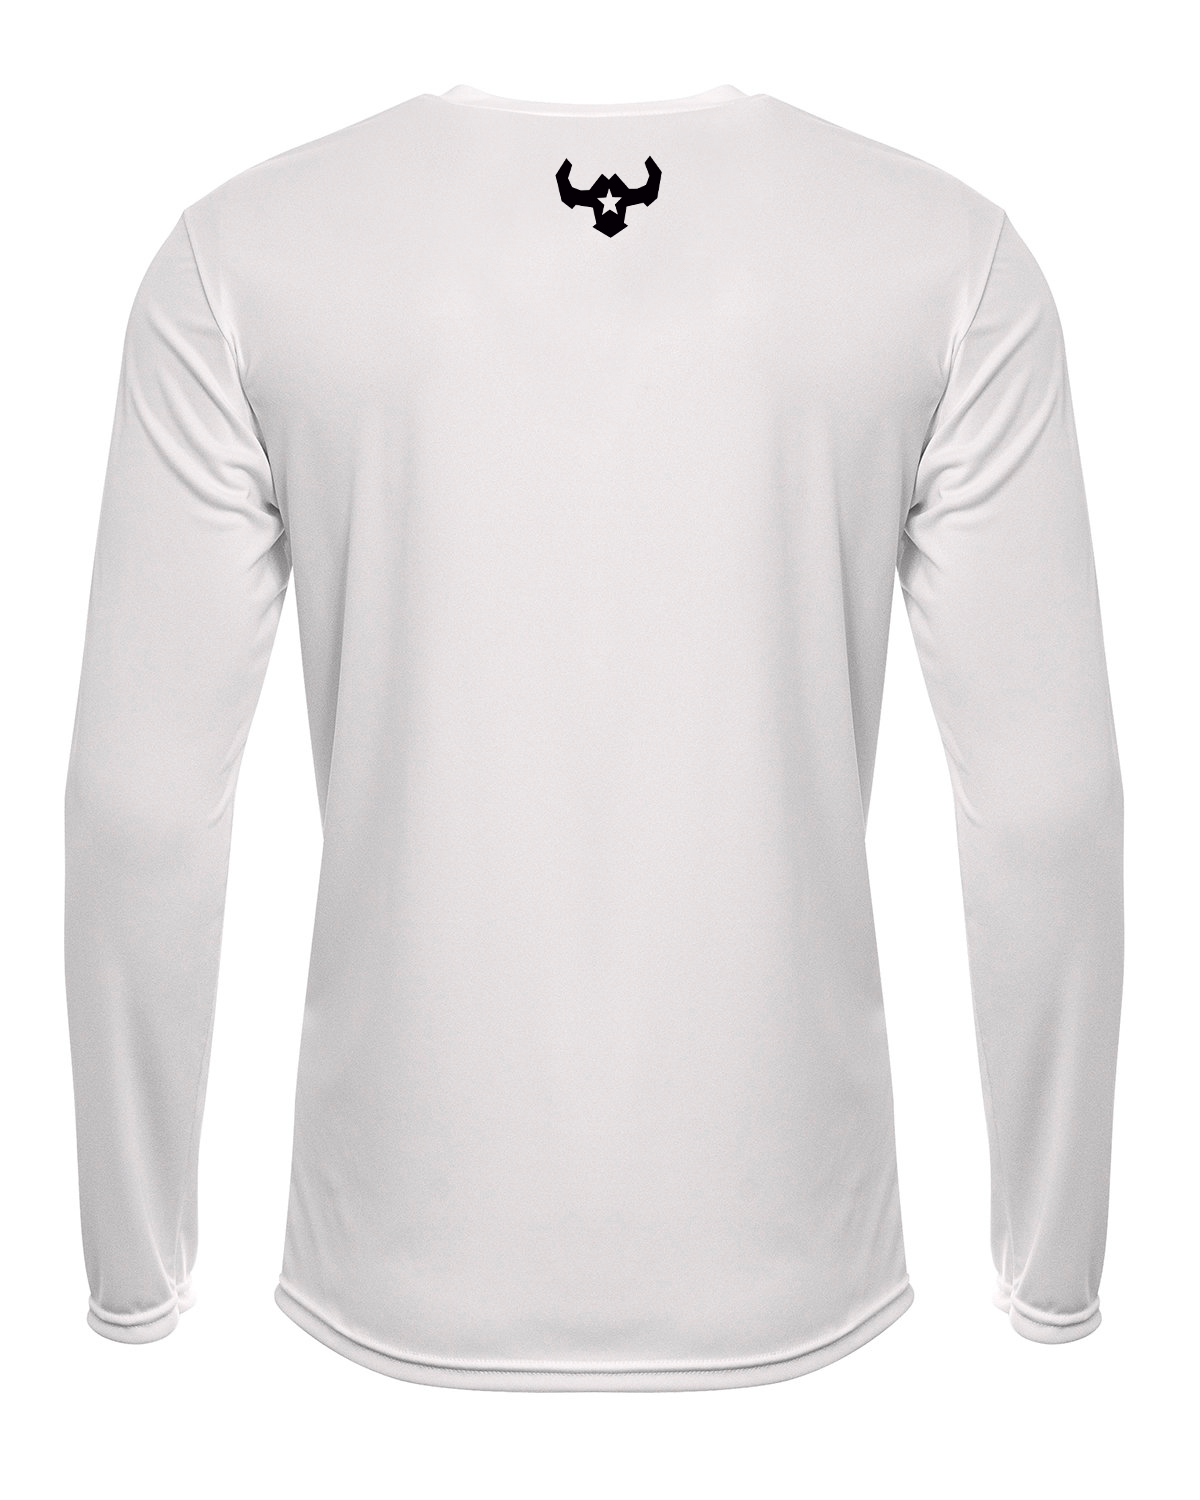 Affordable Custom Apparel Long Sleeve High Performance White VQRO Shirt Outdoors and Fishing